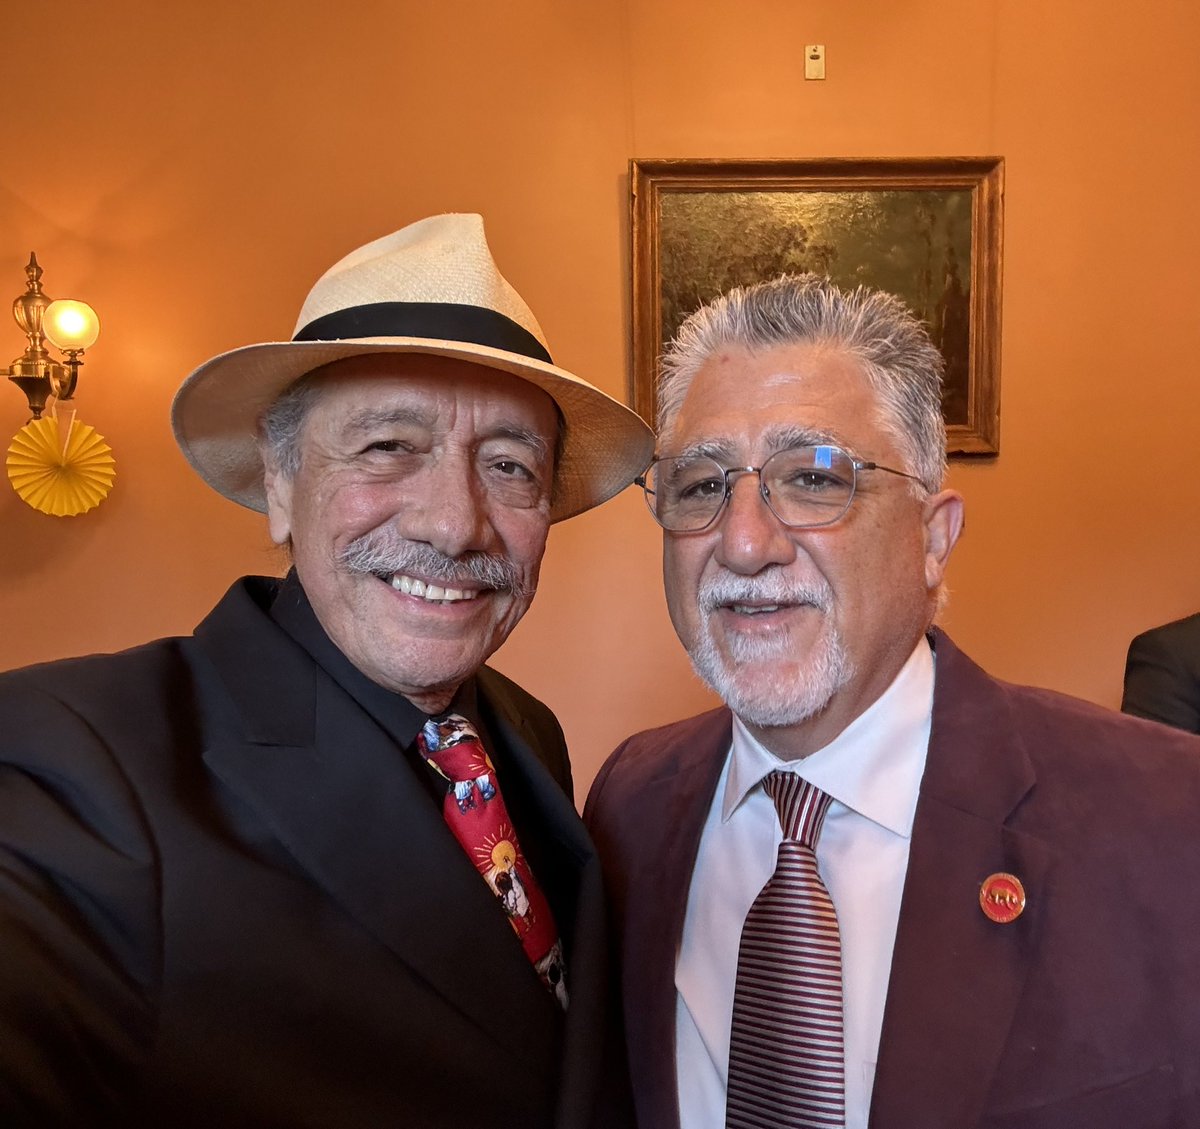 Exciting to have Edward James Olmos in Sacramento today. Had a good moment to express my appreciation of his activism and talent. He took the selfie which was fun.